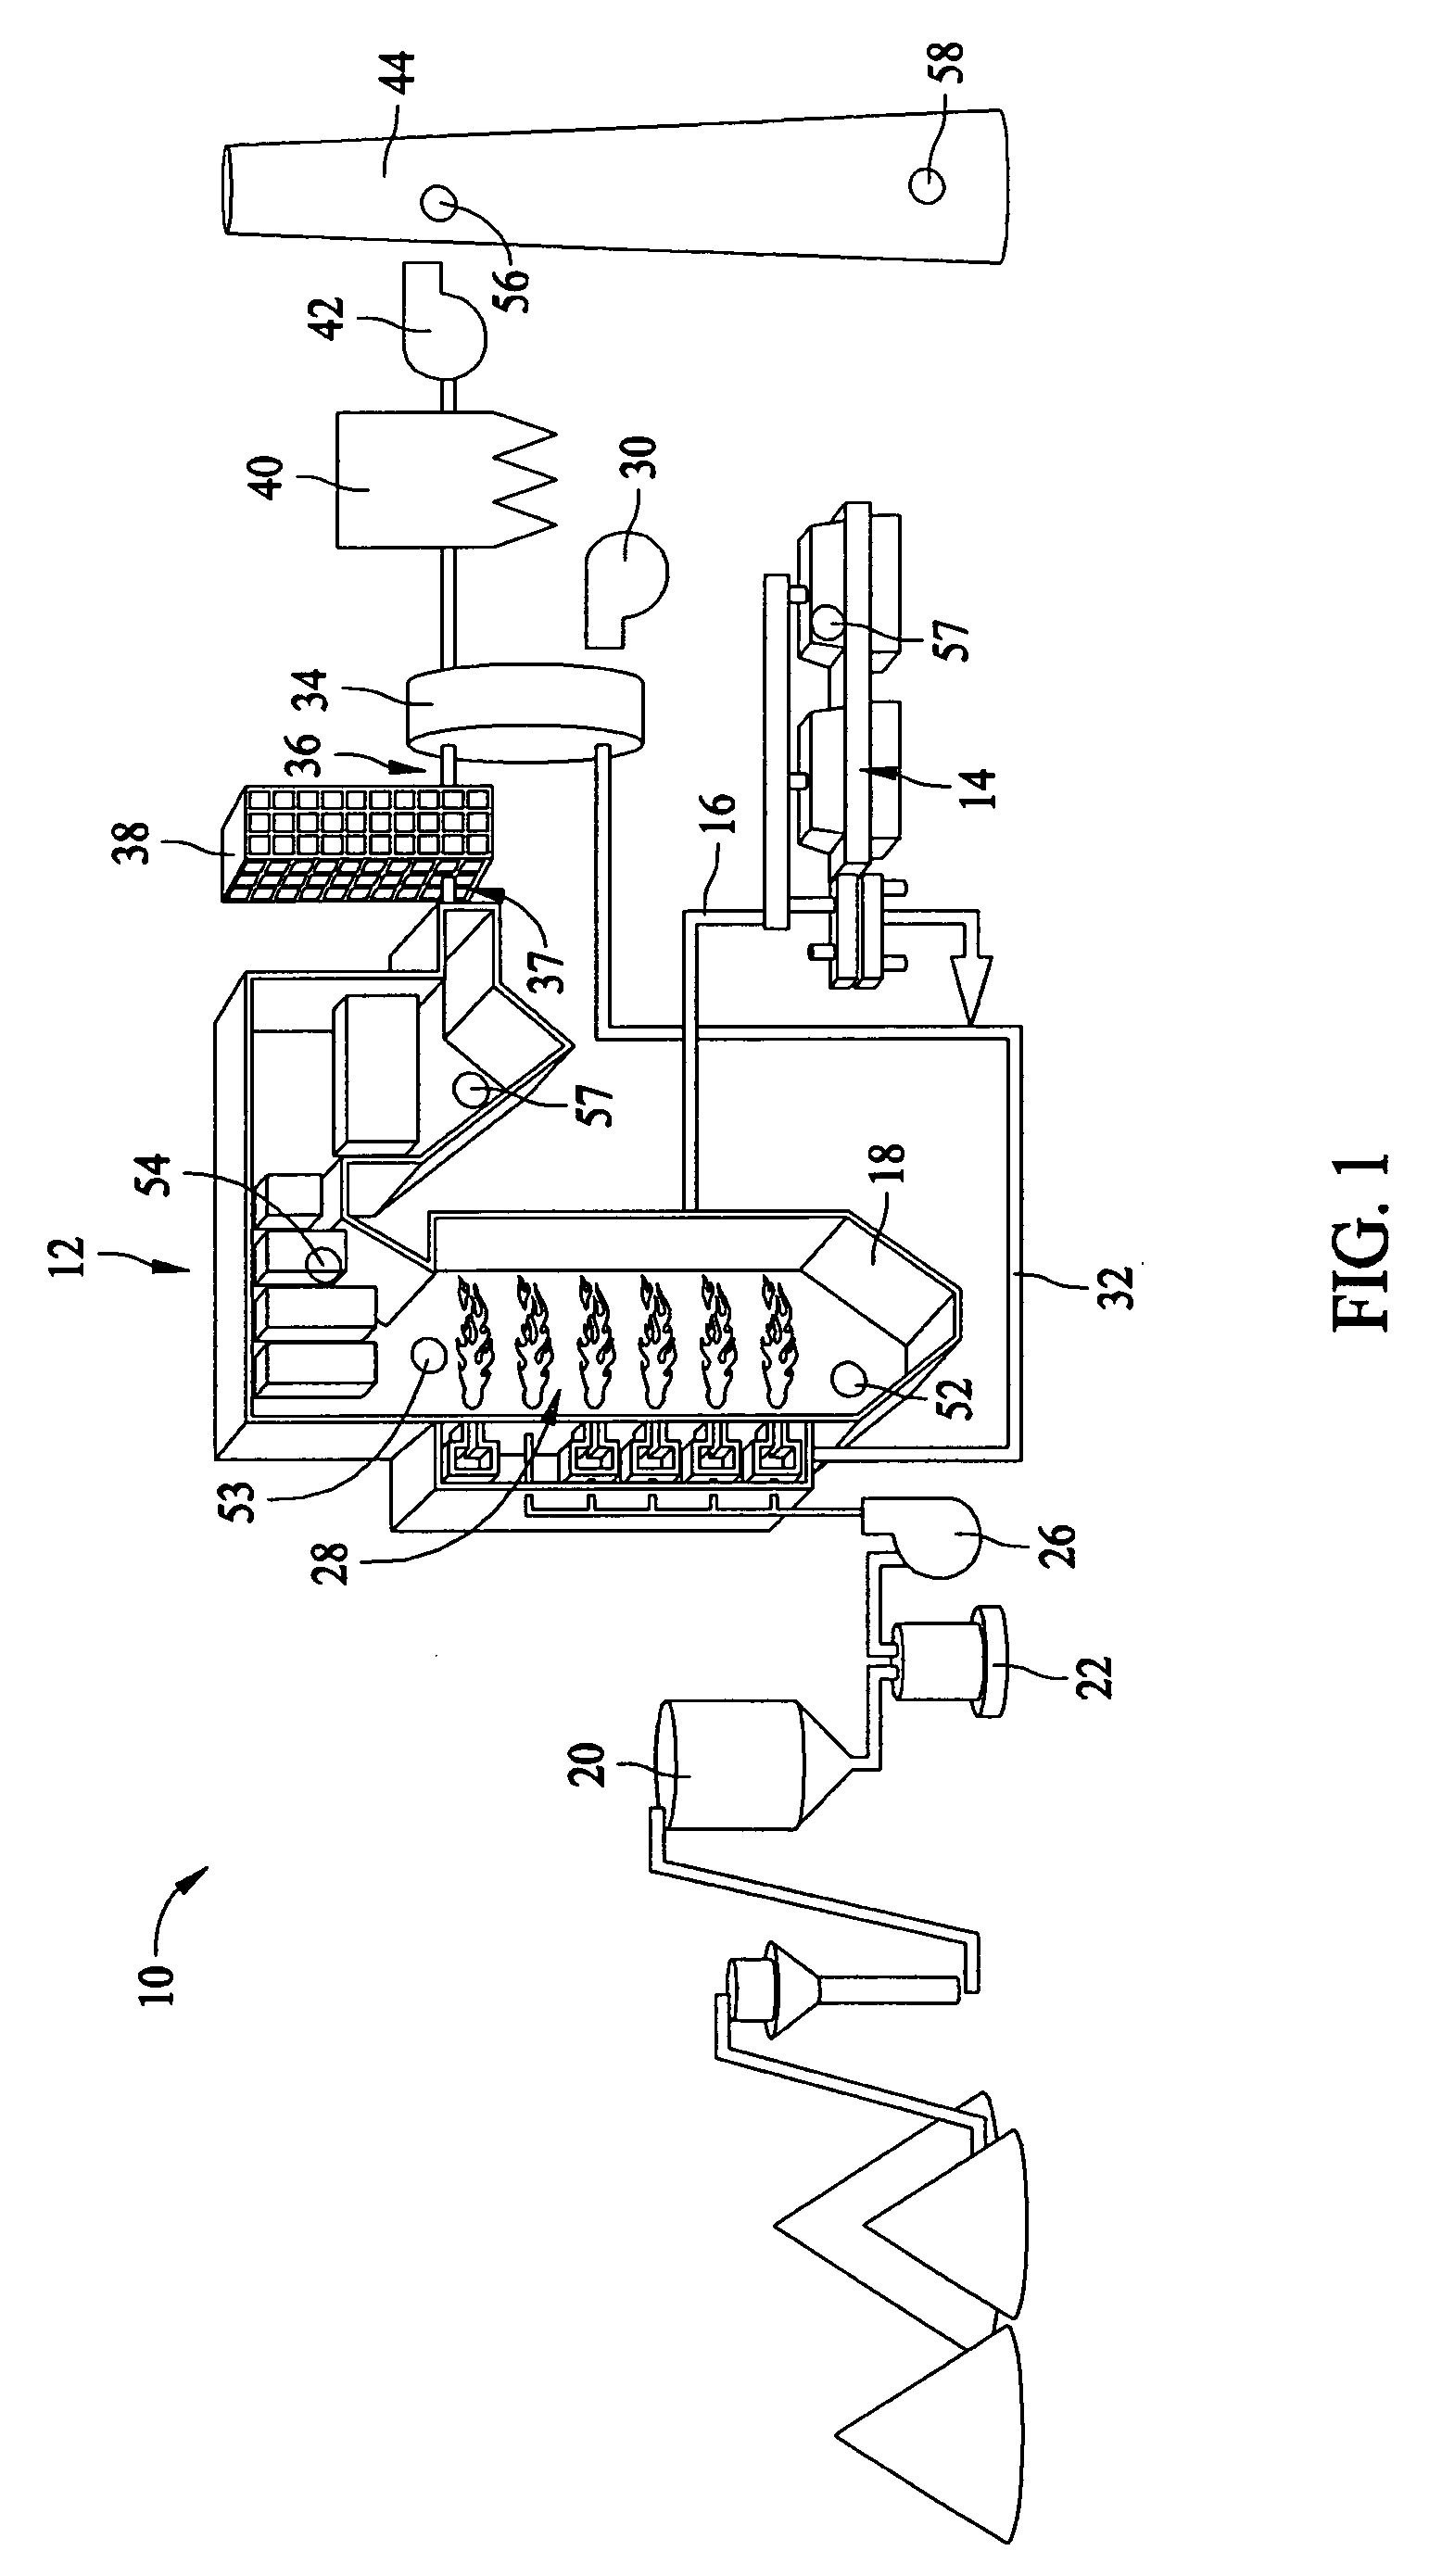 Method, system and module for monitoring a power generating system